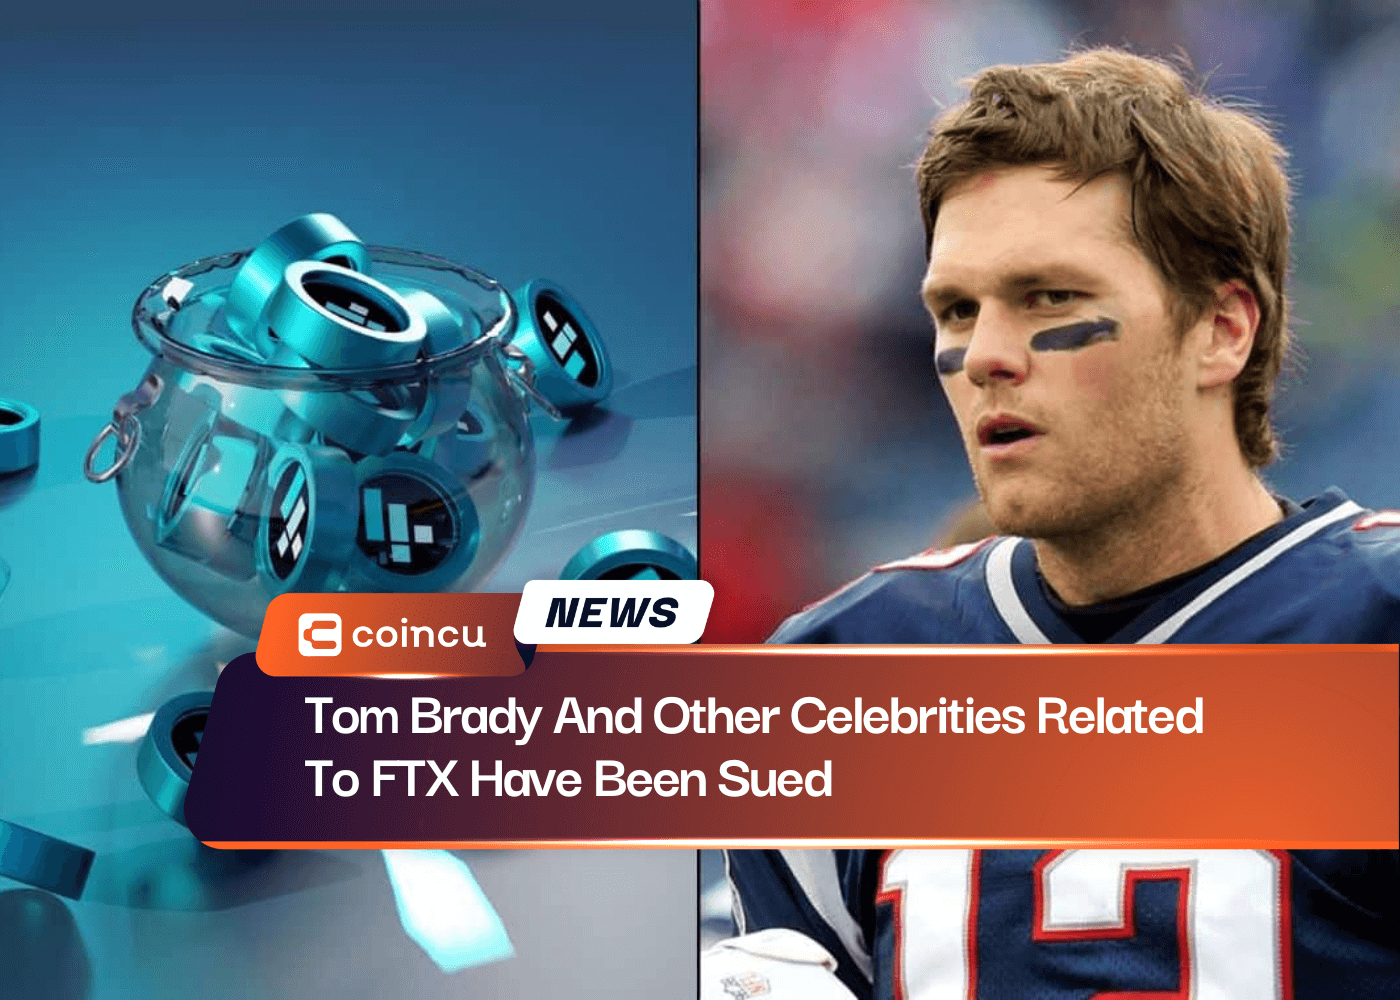 Tom Brady And Other Celebrities Related To FTX Have Been Sued